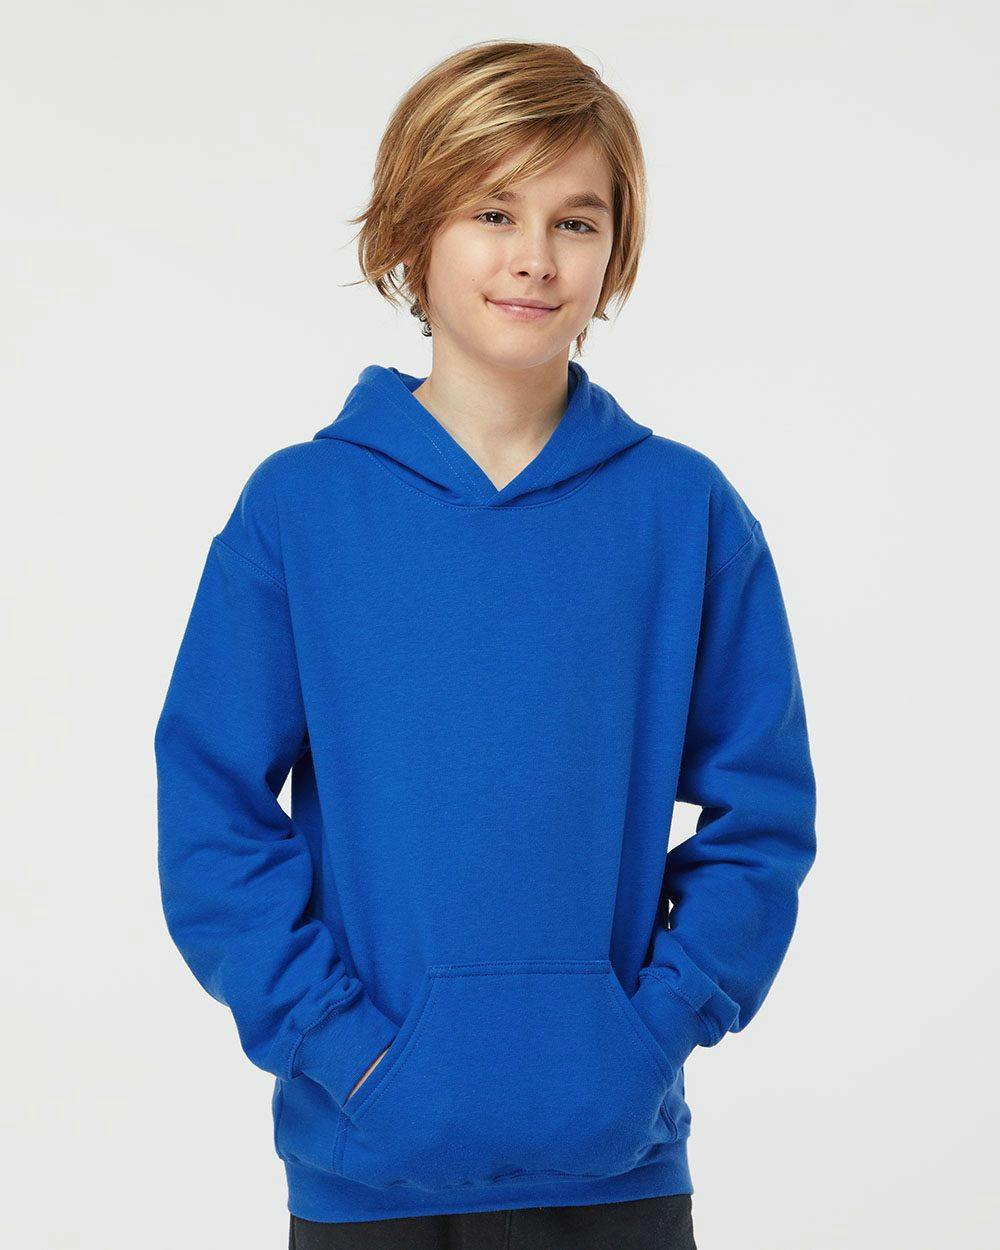 Image for Youth Hooded Sweatshirt - 320Y